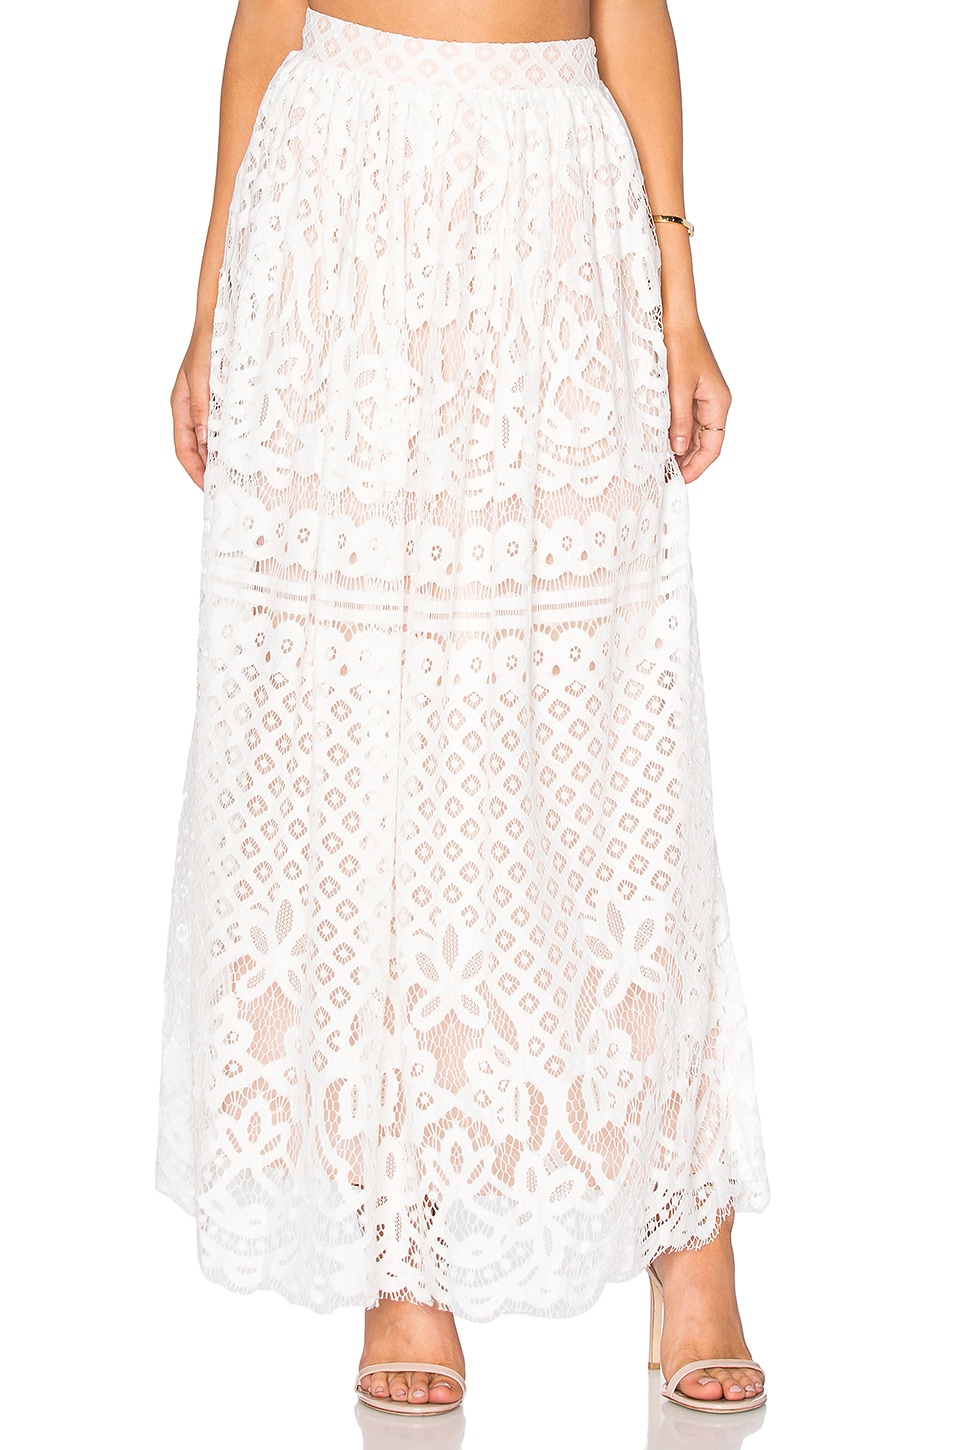 Lucy Paris Lace Maxi Skirt in White | REVOLVE